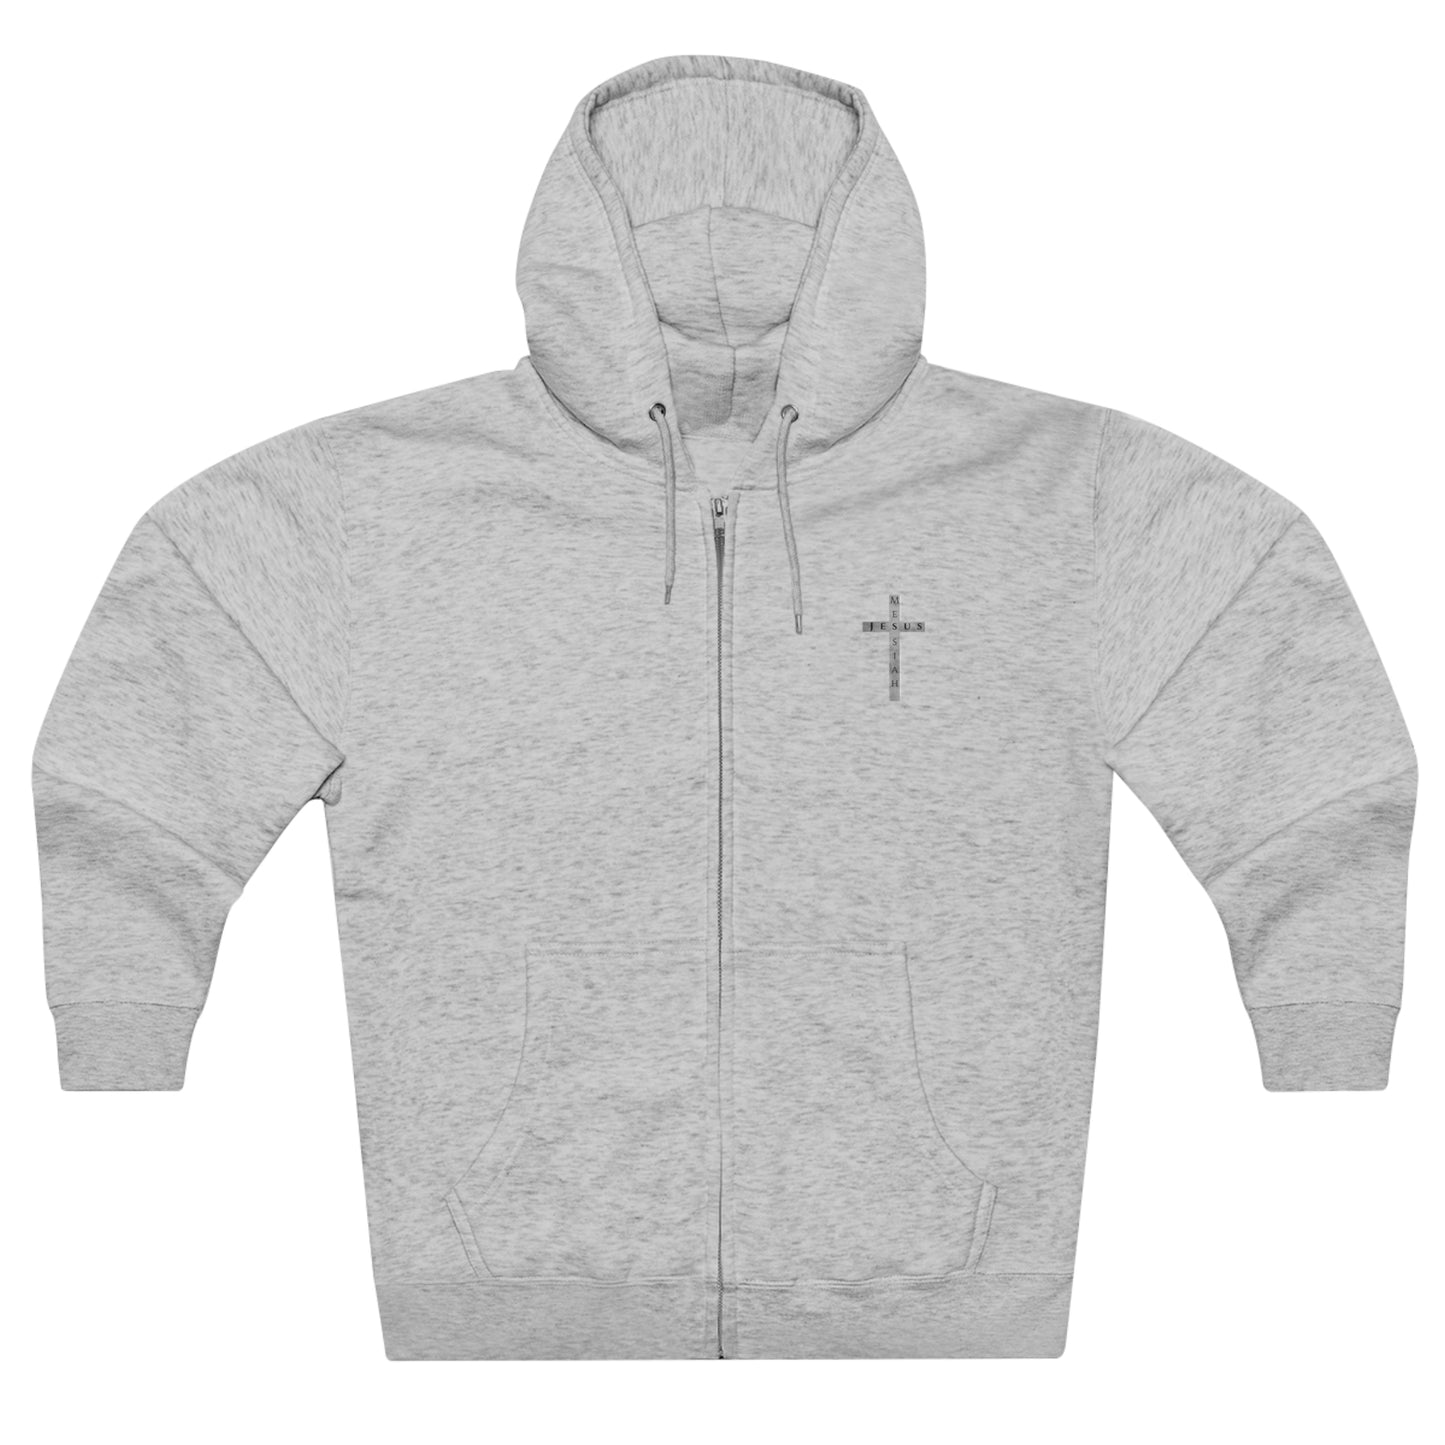 Jesus the Anointed, Christian Zip Hoodie for men and women